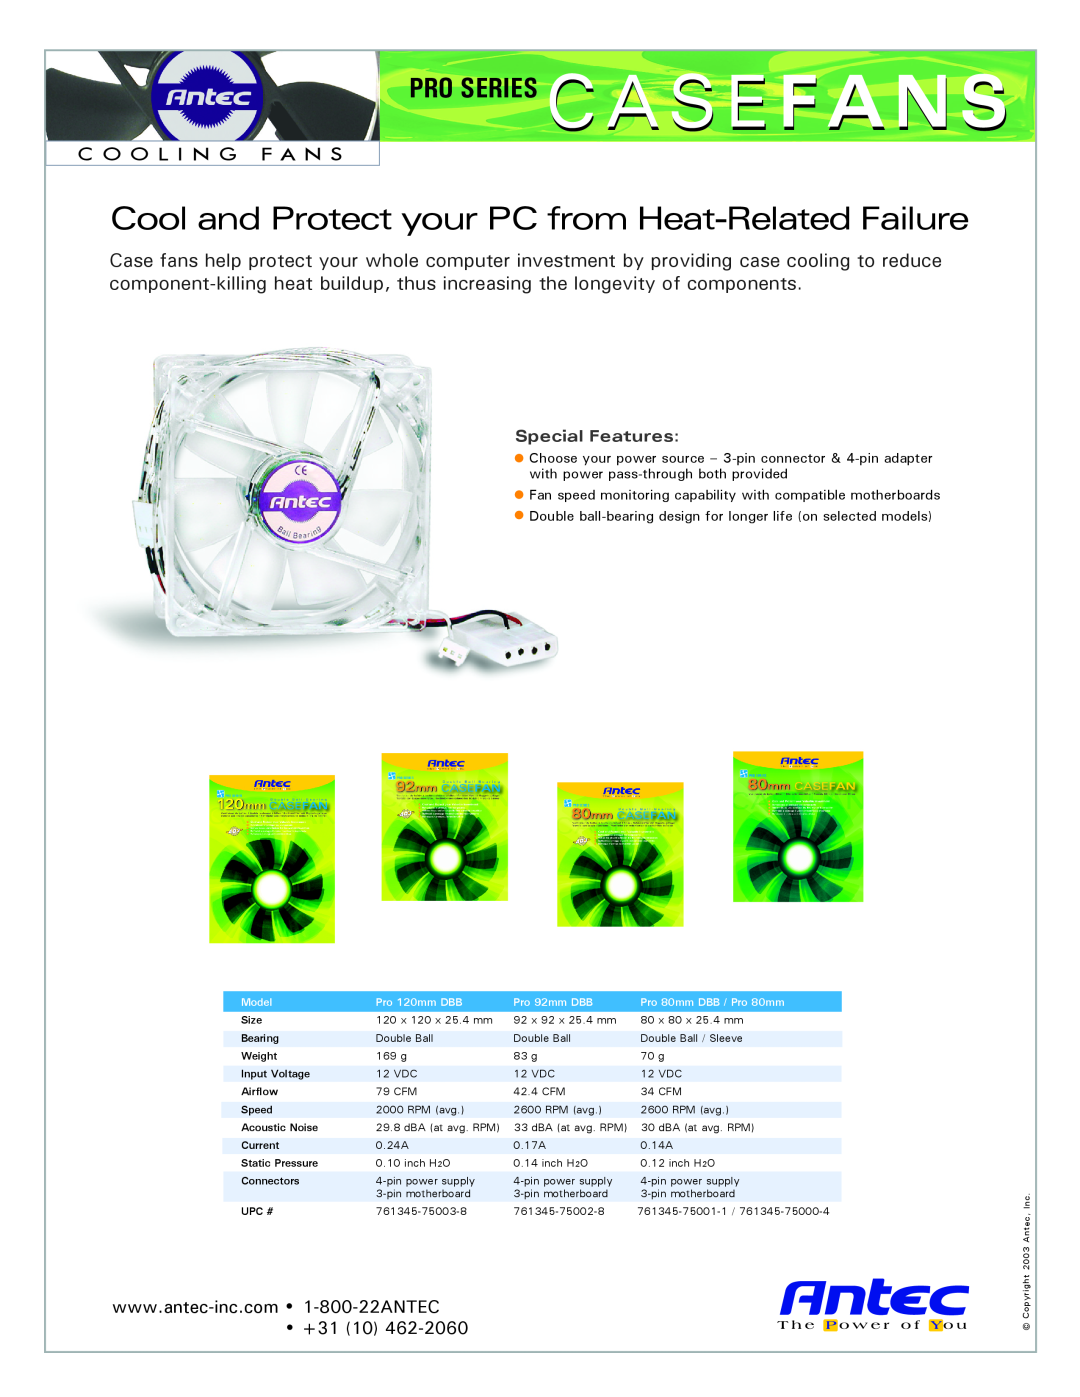 Antec manual Cool and Protect your PC from Heat-Related Failure, Pro Series Casefans, C O O L I N G F A N S 